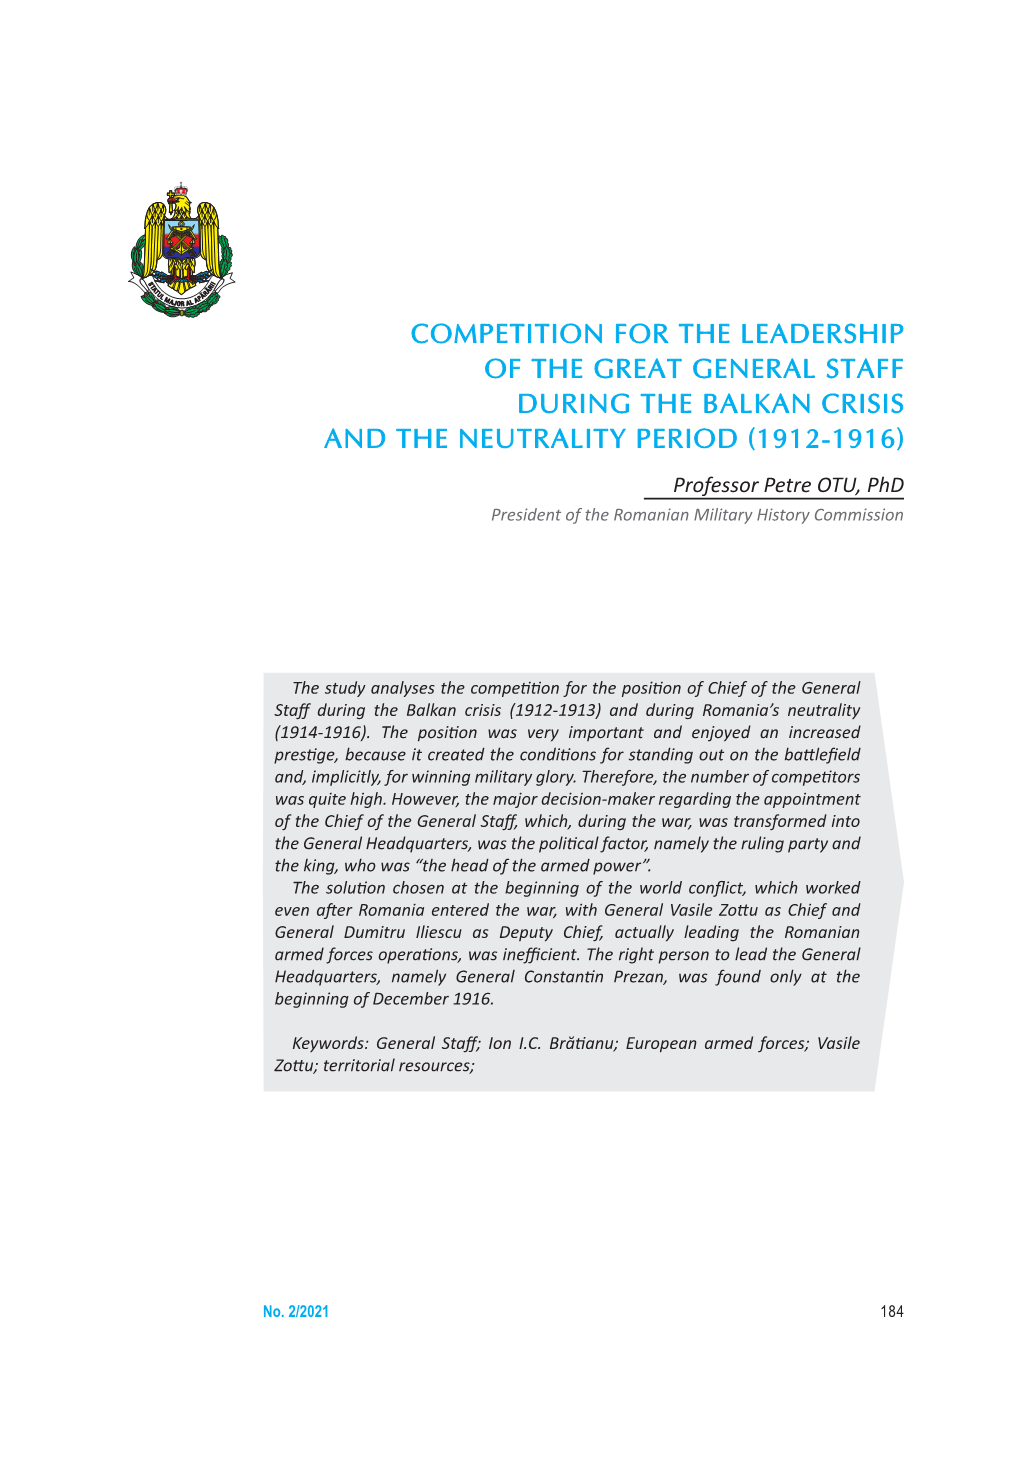 Competition for the Leadership of the Great General Staff During the Balkan Crisis and the Neutrality Period